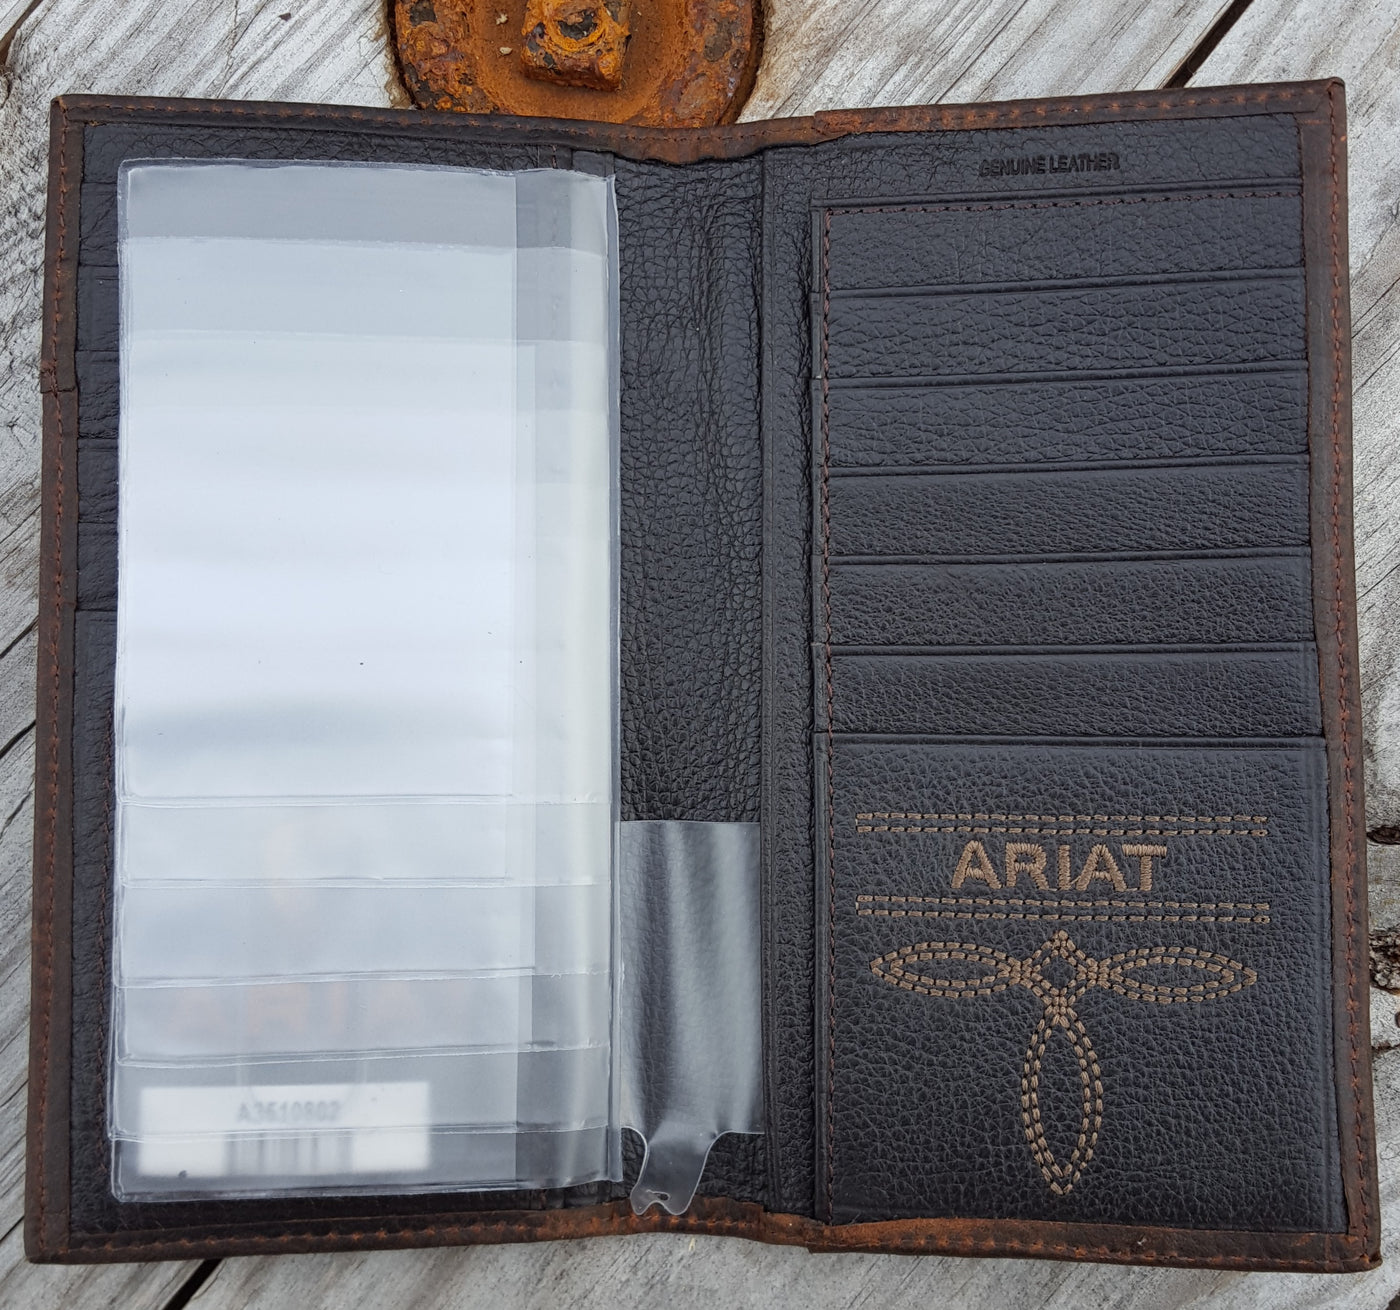 Ariat wallet inside-Ariat Rodeo style wallet Wallet is distressed brown leather with Ariat shield concho and Western style stitching Multiple credit card slots, clear driver's license slot and removable picture holder. Folded wallet measures 7" tall by 3" wide Interior has twelve card slots, one open cash pocket, and an identification window plus removable clear plastic picture holder.